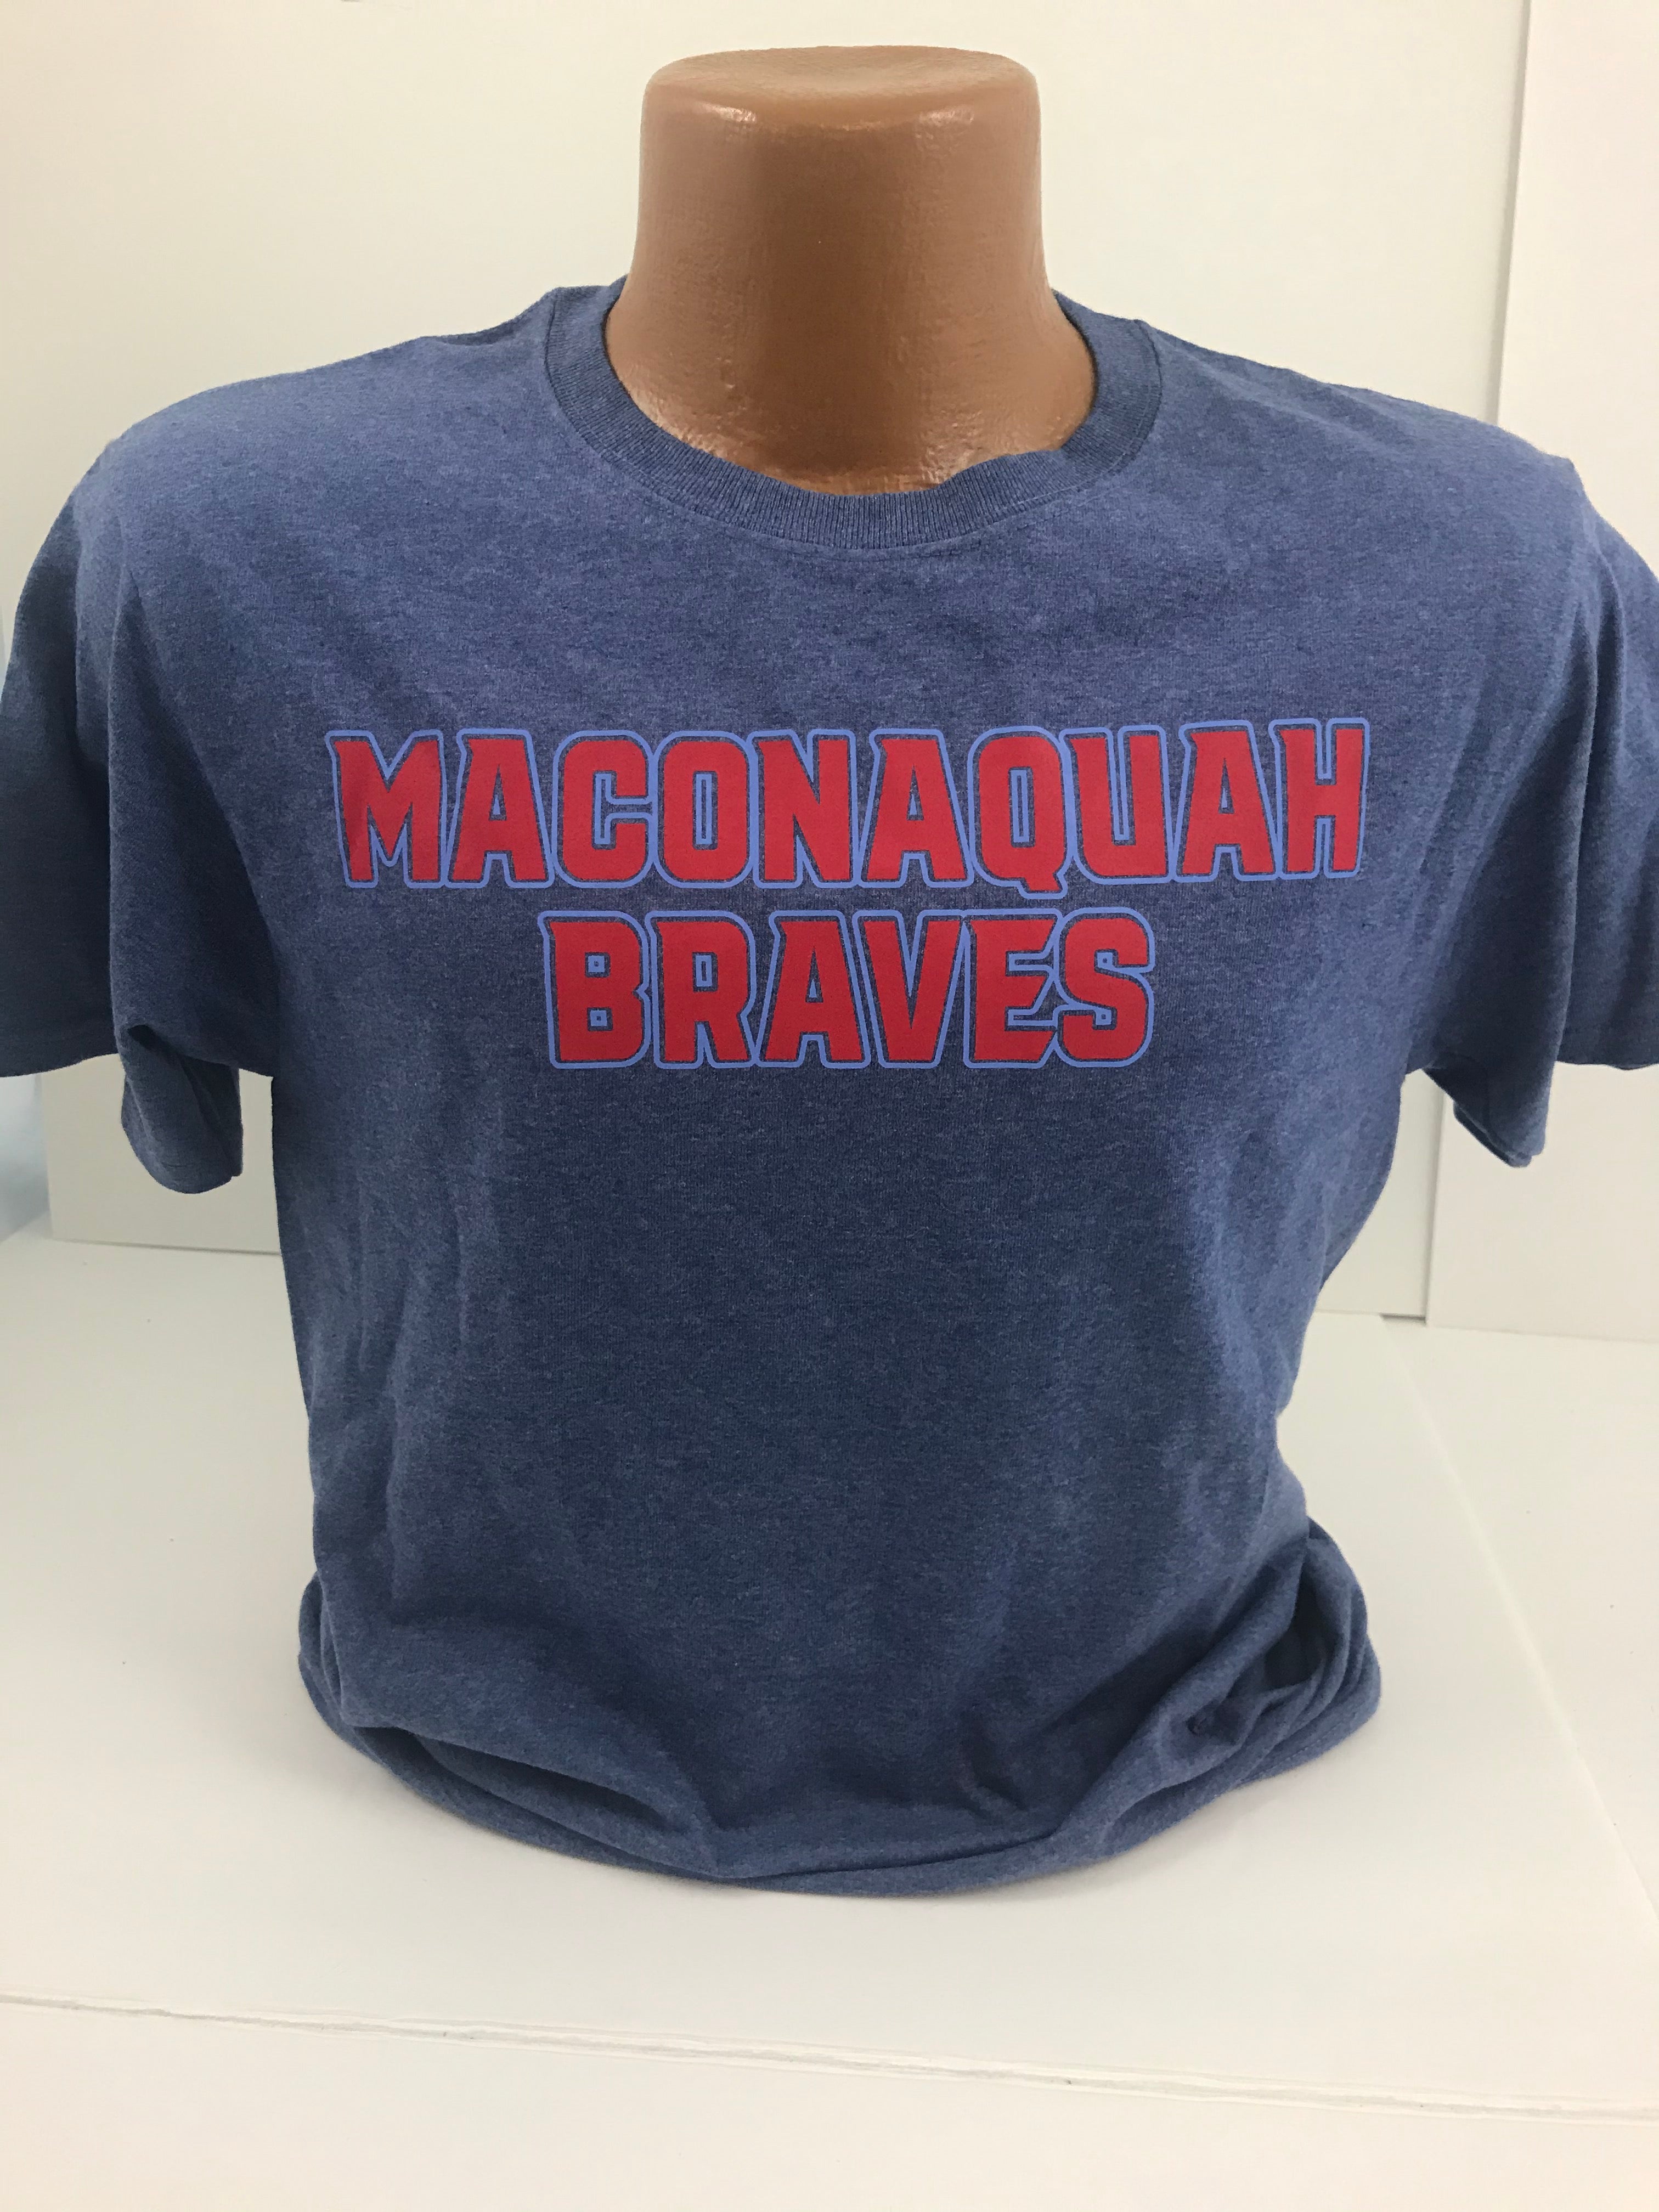 Maconaquah Braves T-shirt Stacked Words You choose the t-shirt color